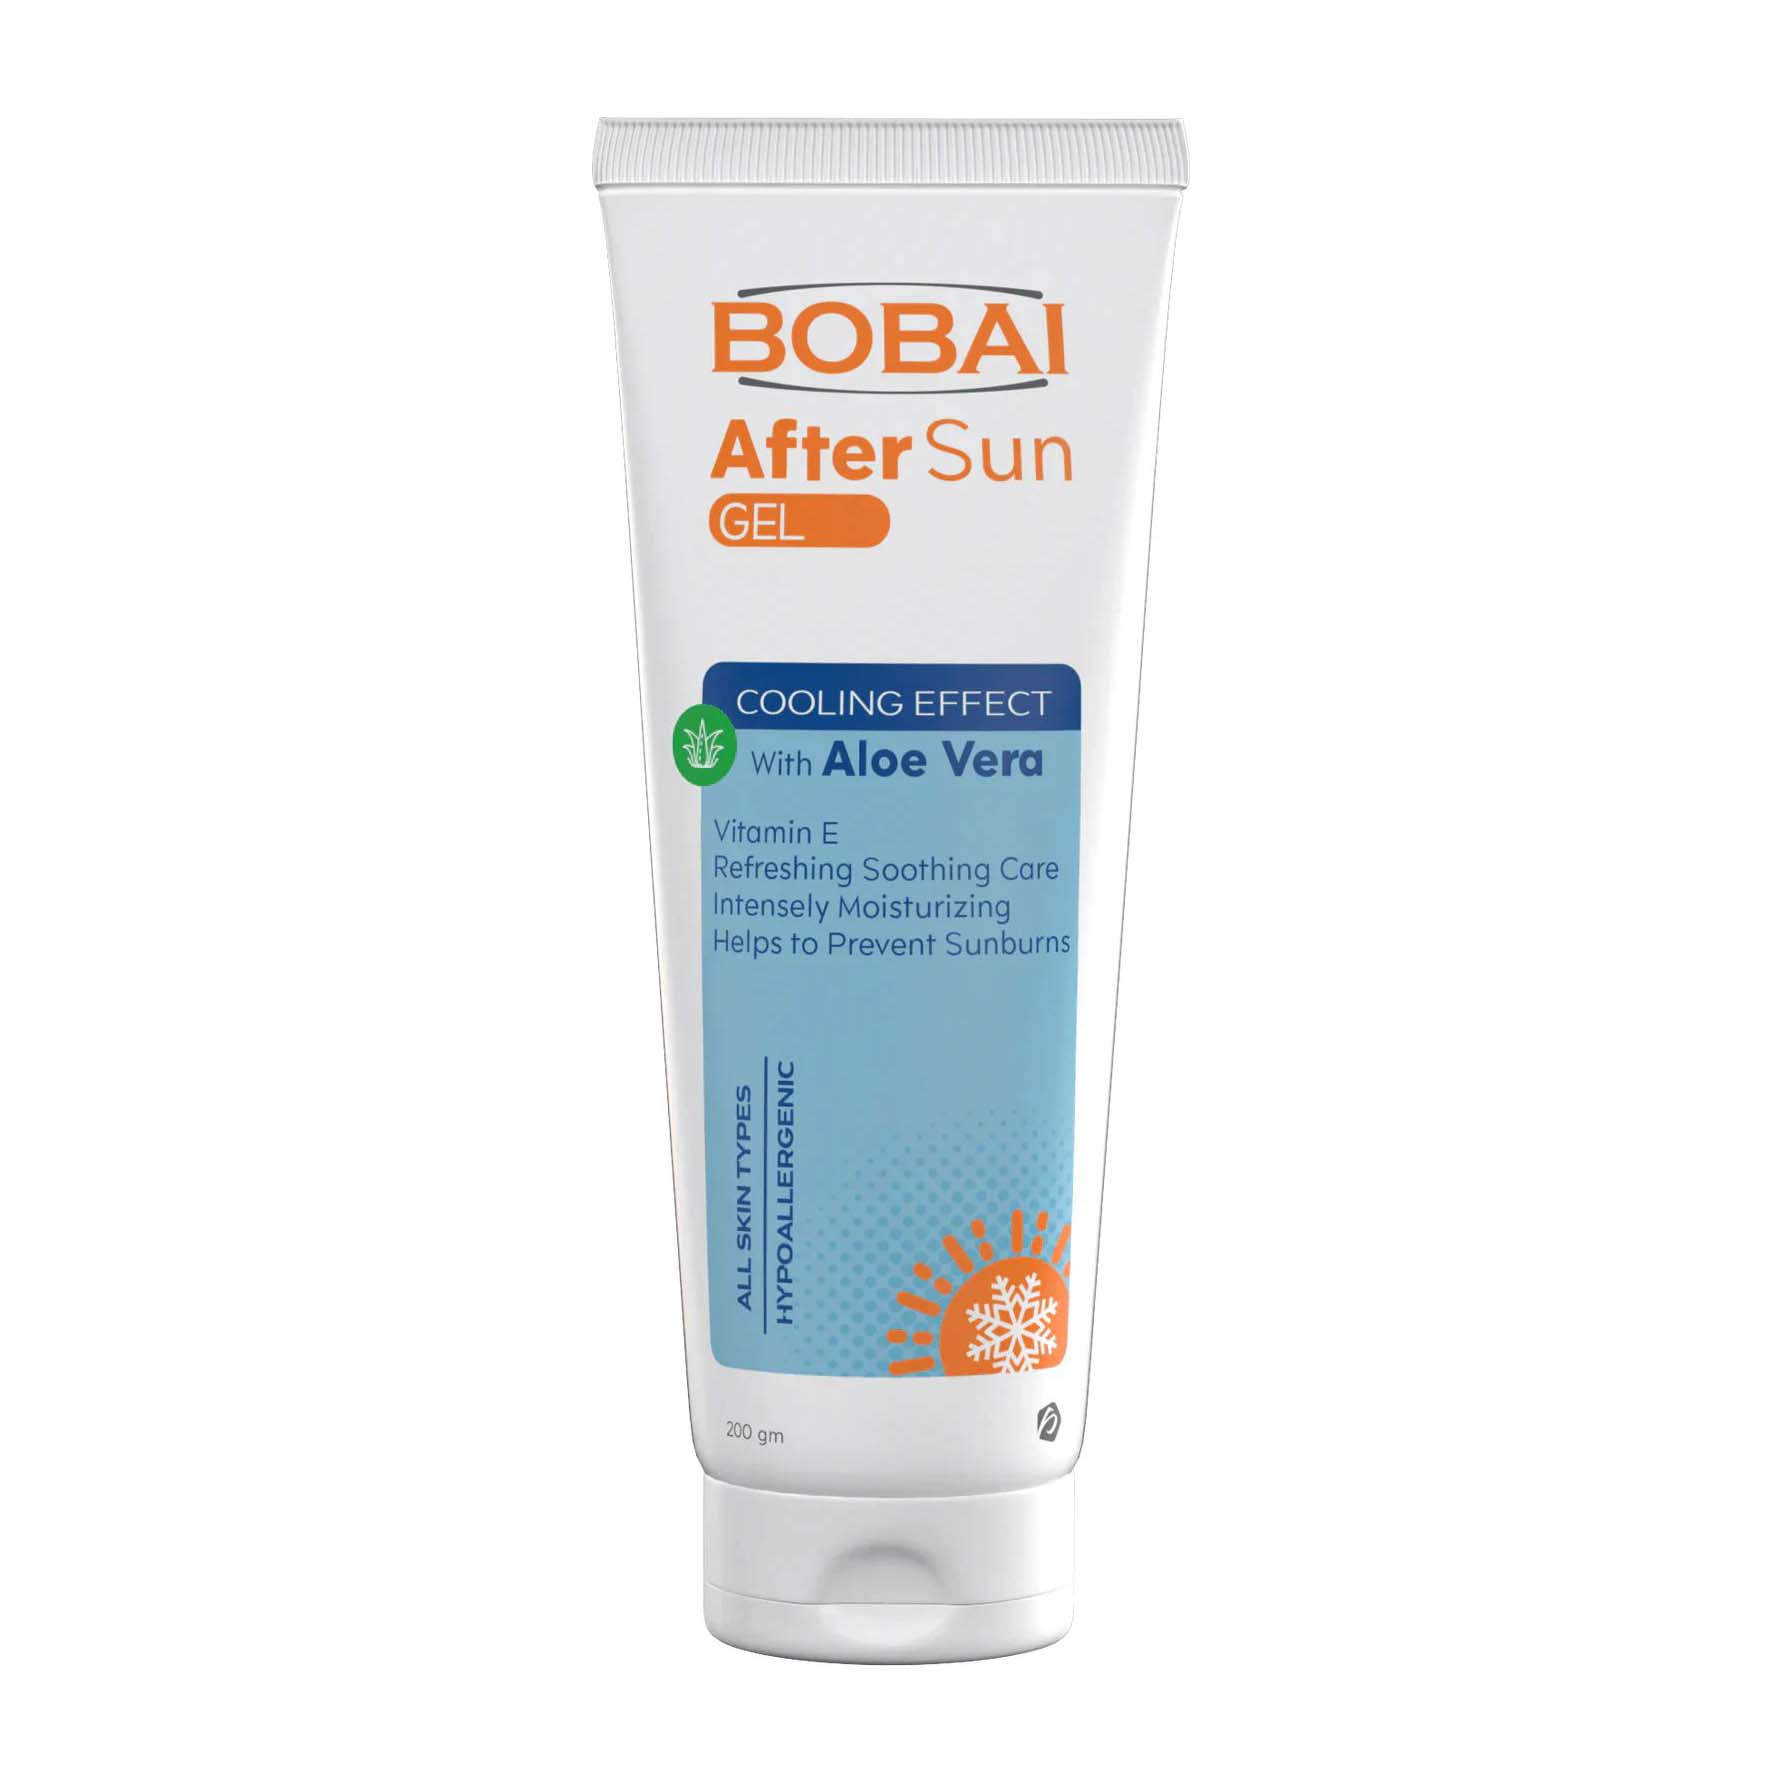 Bobai Cooling Effect With Aloe Vera After Sun Gel - 200gm - Bloom Pharmacy